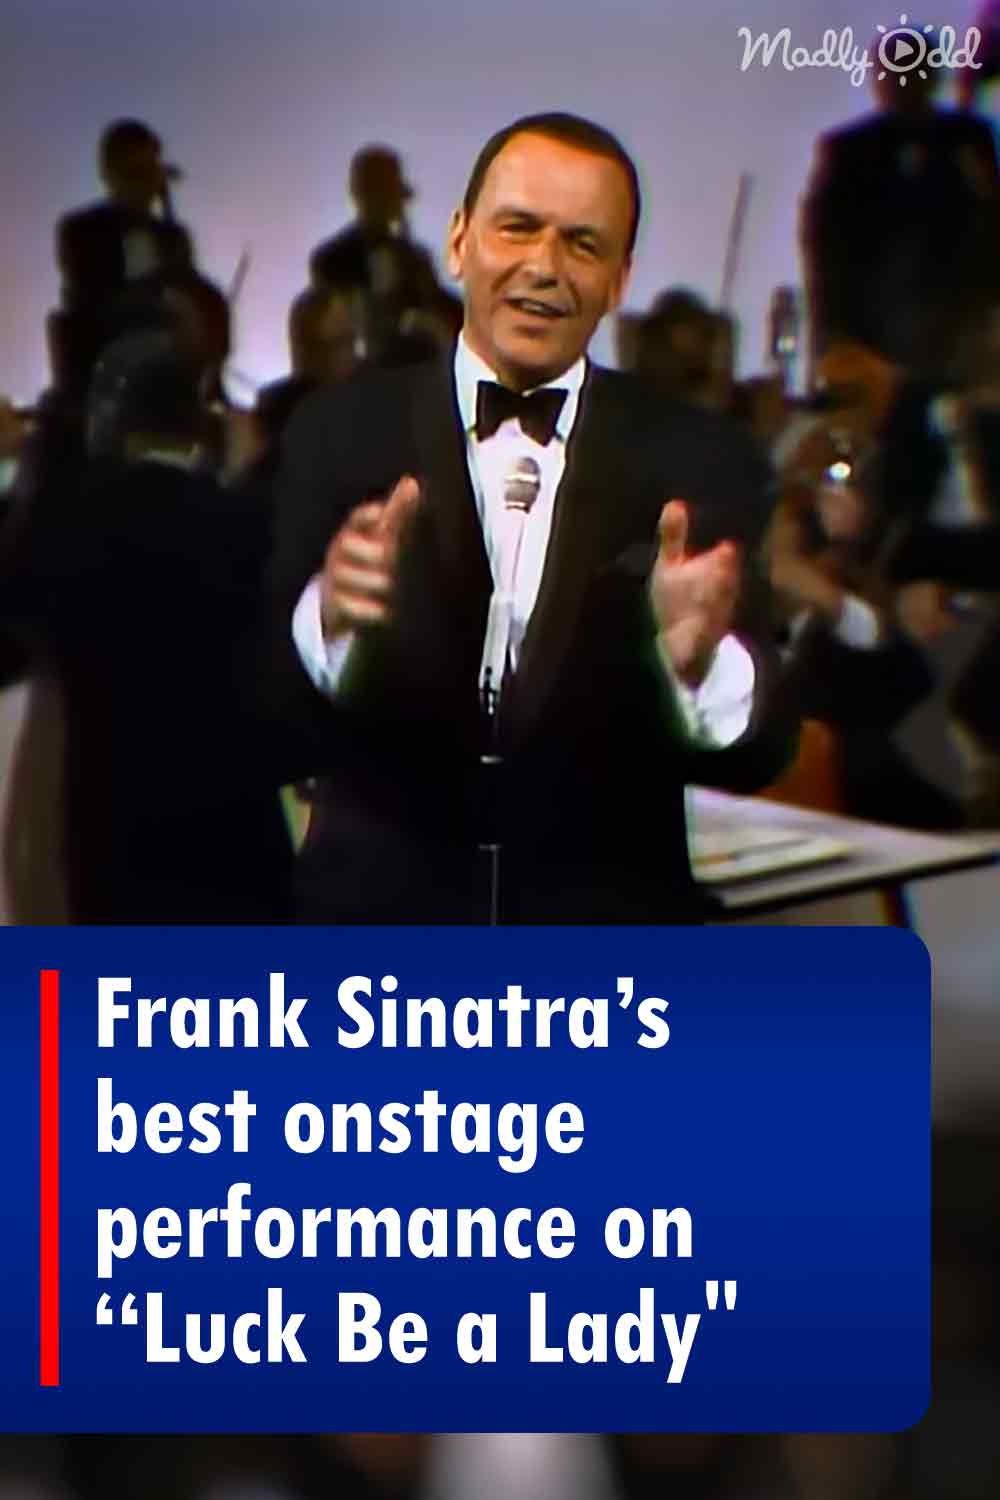 Frank Sinatra’s best onstage performance on “Luck Be a Lady\